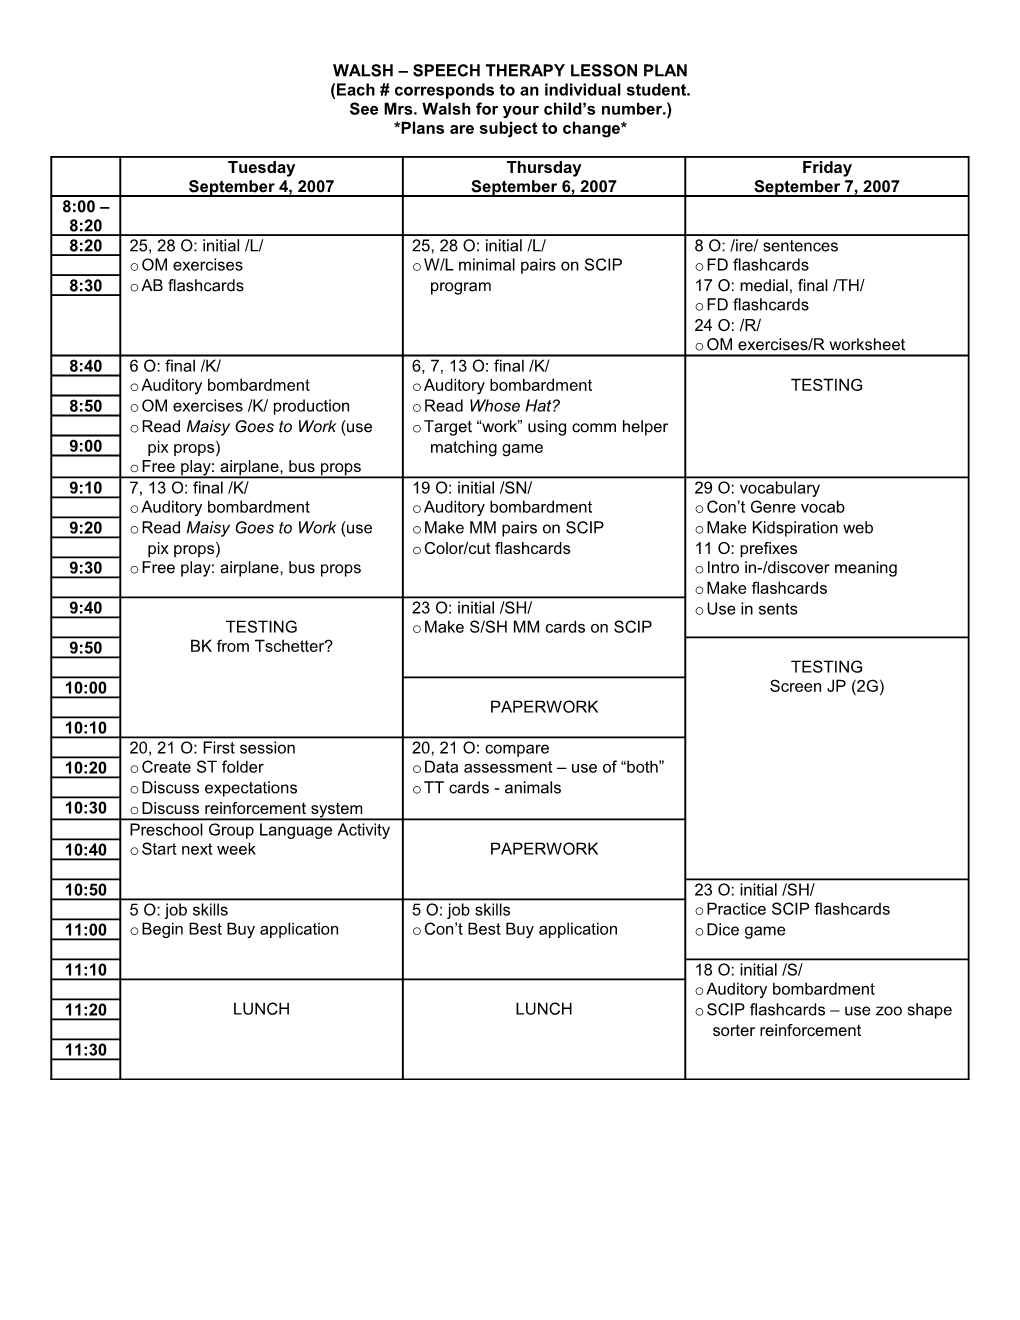 Walsh Speech Therapy Schedule